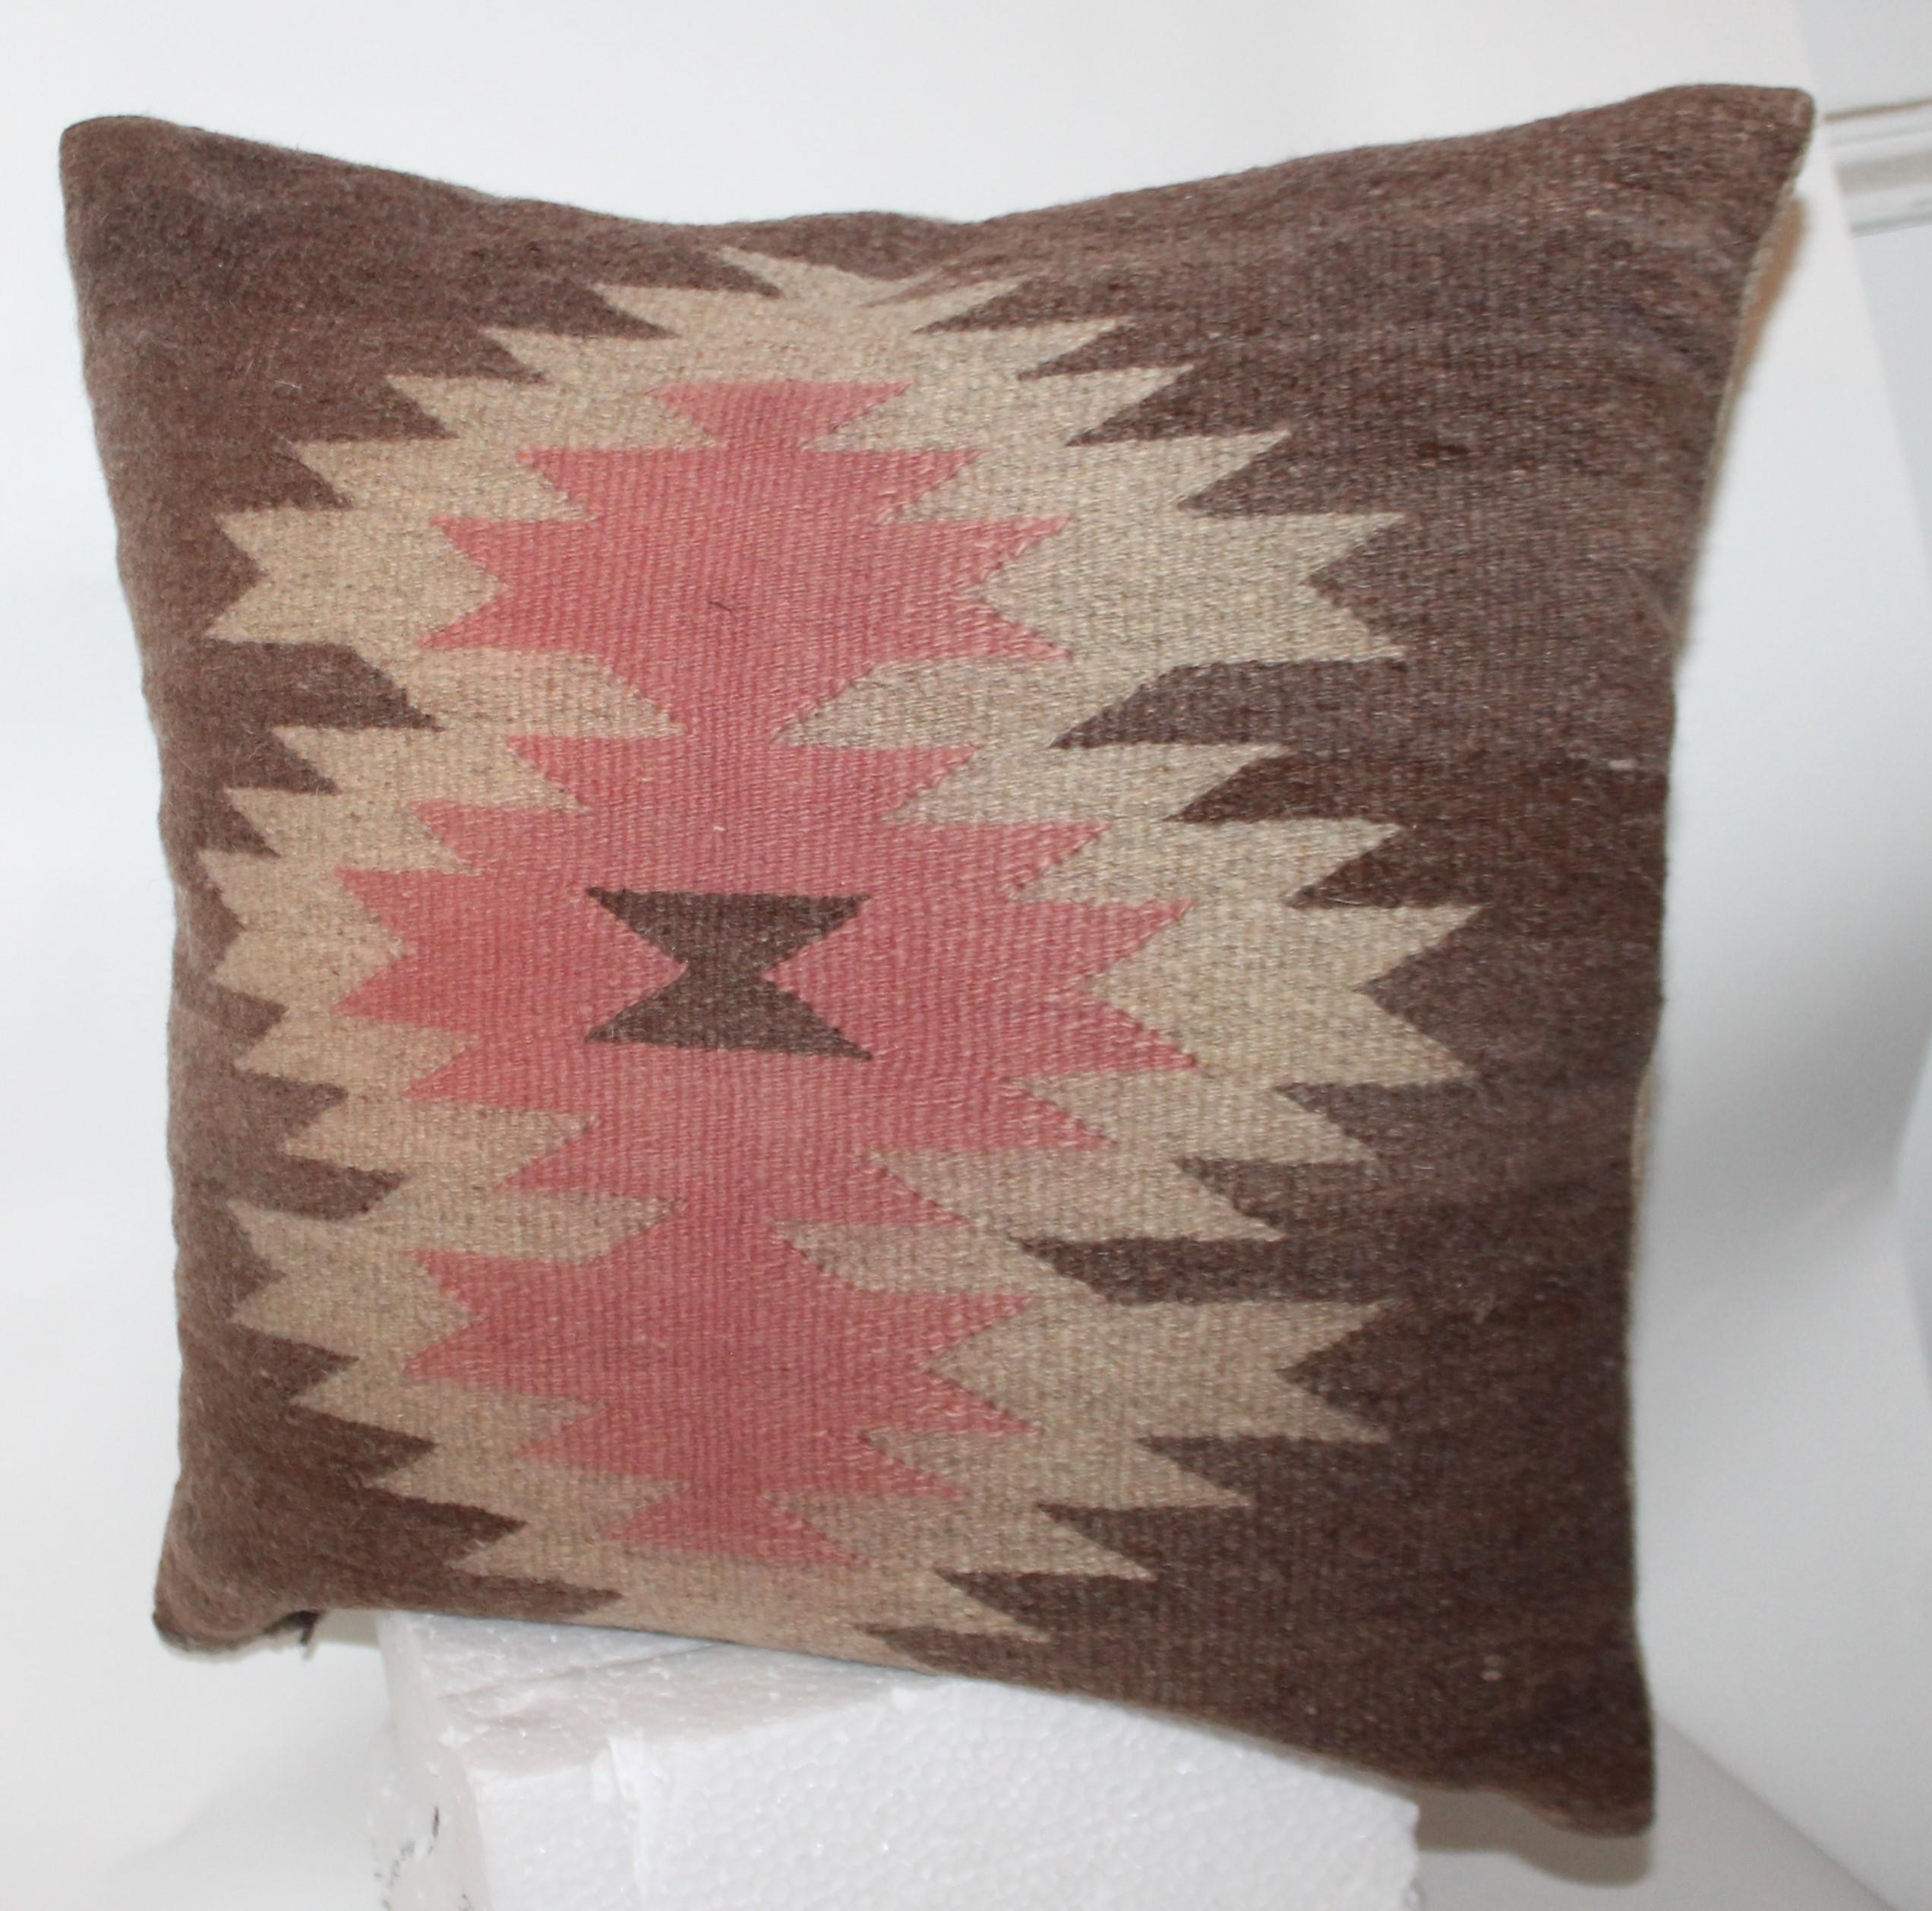 This is such unusual colors and fine weaving with such somber colors. The backing is in a thick homespun linen.